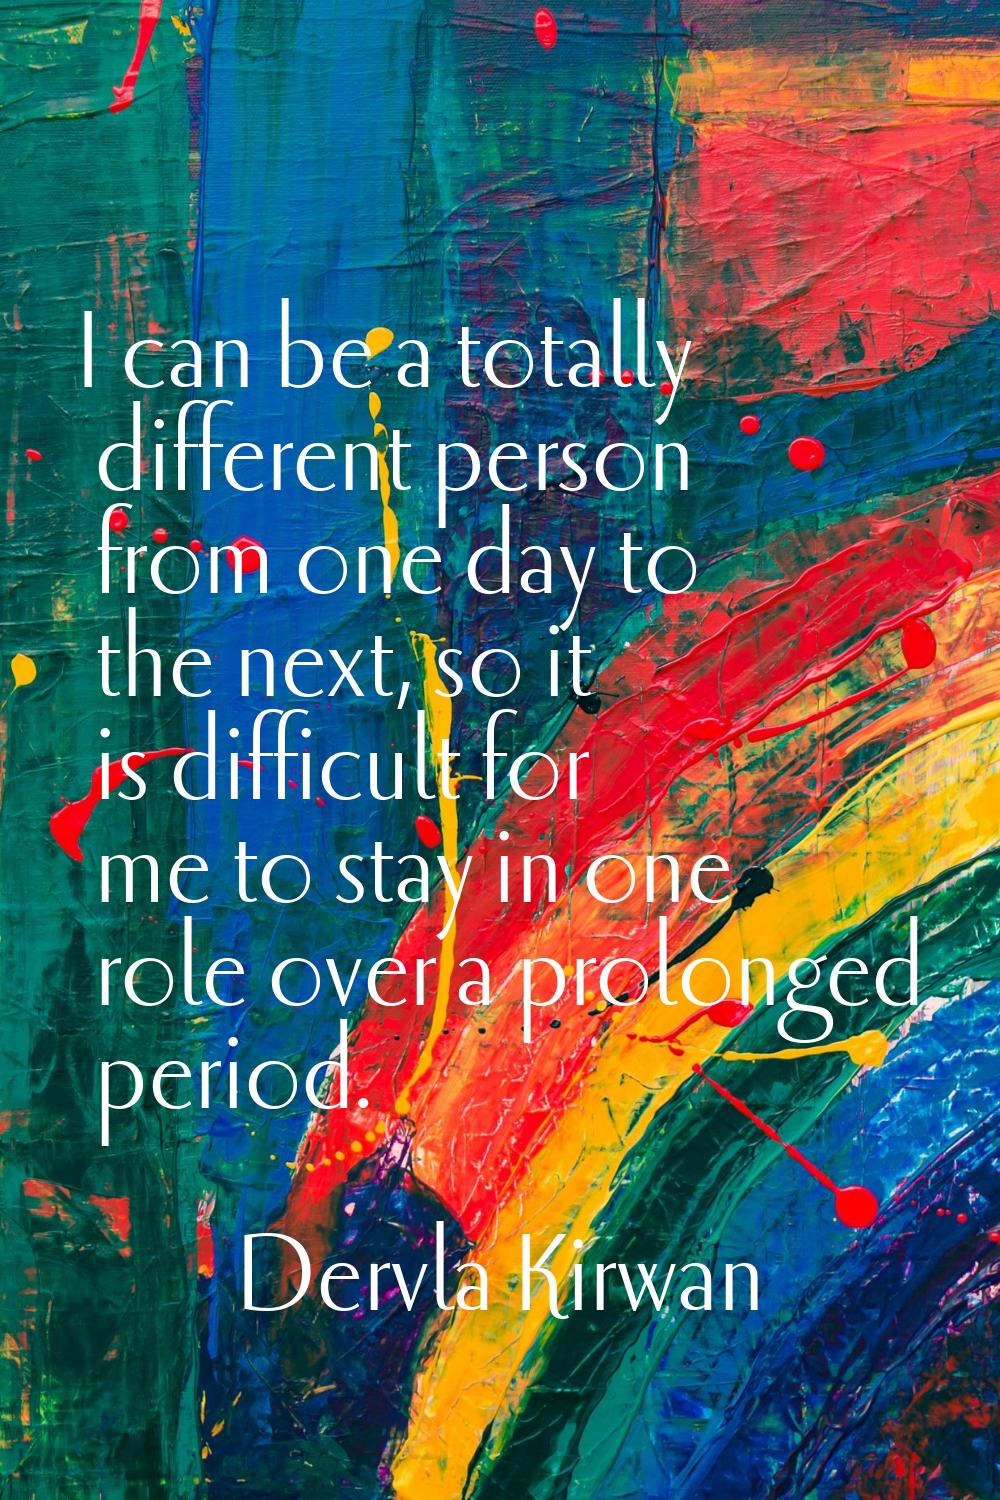 I can be a totally different person from one day to the next, so it is difficult for me to stay in 